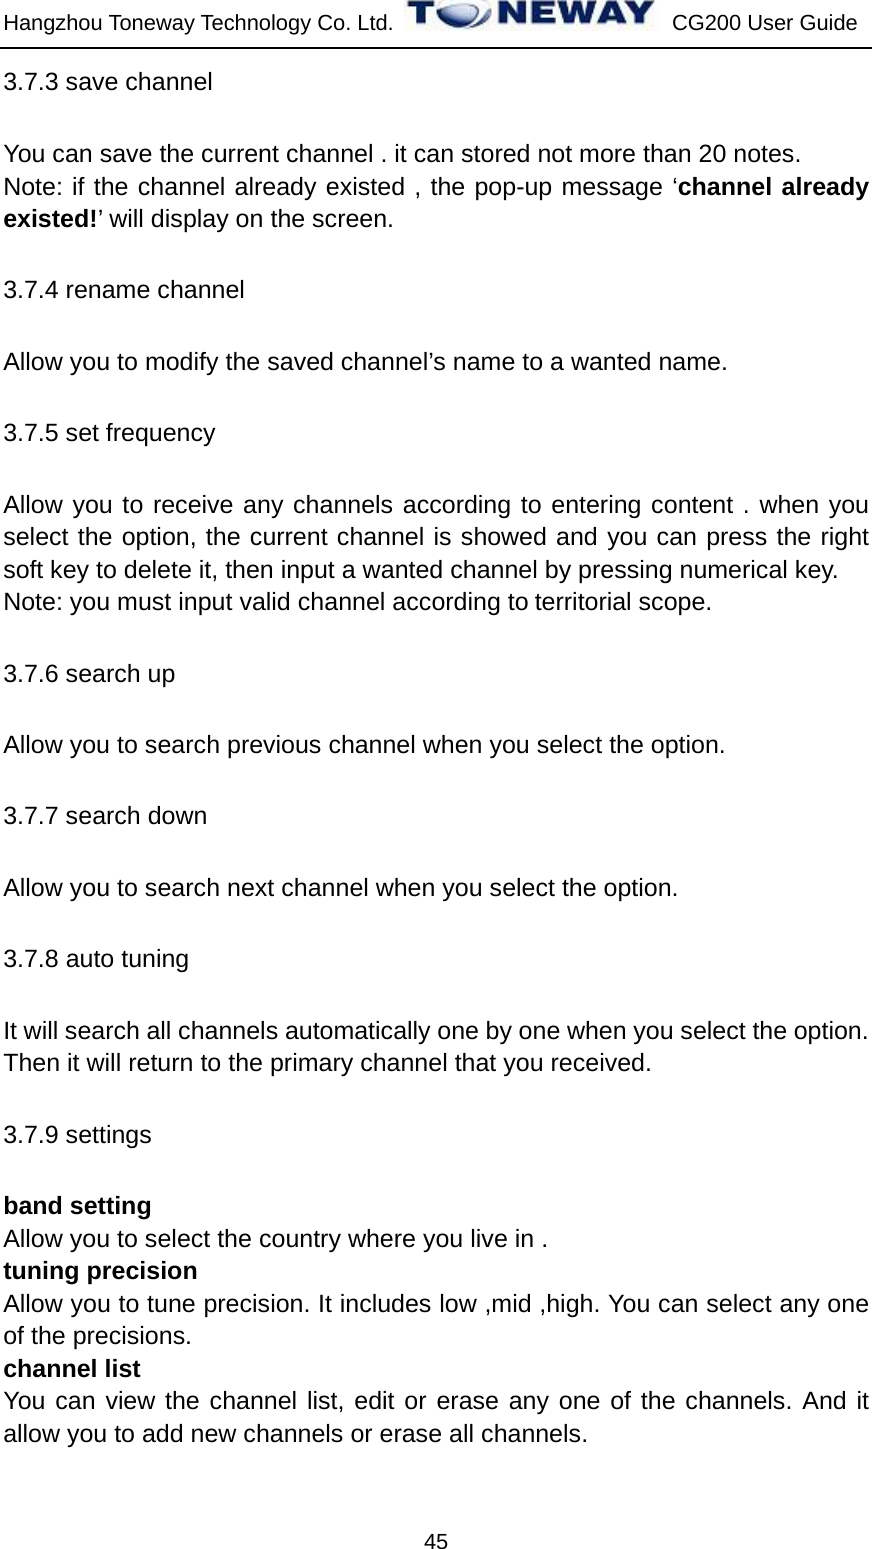 Hangzhou Toneway Technology Co. Ltd.    CG200 User Guide 45 3.7.3 save channel You can save the current channel . it can stored not more than 20 notes. Note: if the channel already existed , the pop-up message ‘channel already existed!’ will display on the screen. 3.7.4 rename channel Allow you to modify the saved channel’s name to a wanted name. 3.7.5 set frequency Allow you to receive any channels according to entering content . when you select the option, the current channel is showed and you can press the right soft key to delete it, then input a wanted channel by pressing numerical key. Note: you must input valid channel according to territorial scope. 3.7.6 search up Allow you to search previous channel when you select the option. 3.7.7 search down Allow you to search next channel when you select the option. 3.7.8 auto tuning It will search all channels automatically one by one when you select the option. Then it will return to the primary channel that you received. 3.7.9 settings band setting Allow you to select the country where you live in . tuning precision Allow you to tune precision. It includes low ,mid ,high. You can select any one of the precisions. channel list You can view the channel list, edit or erase any one of the channels. And it allow you to add new channels or erase all channels.  